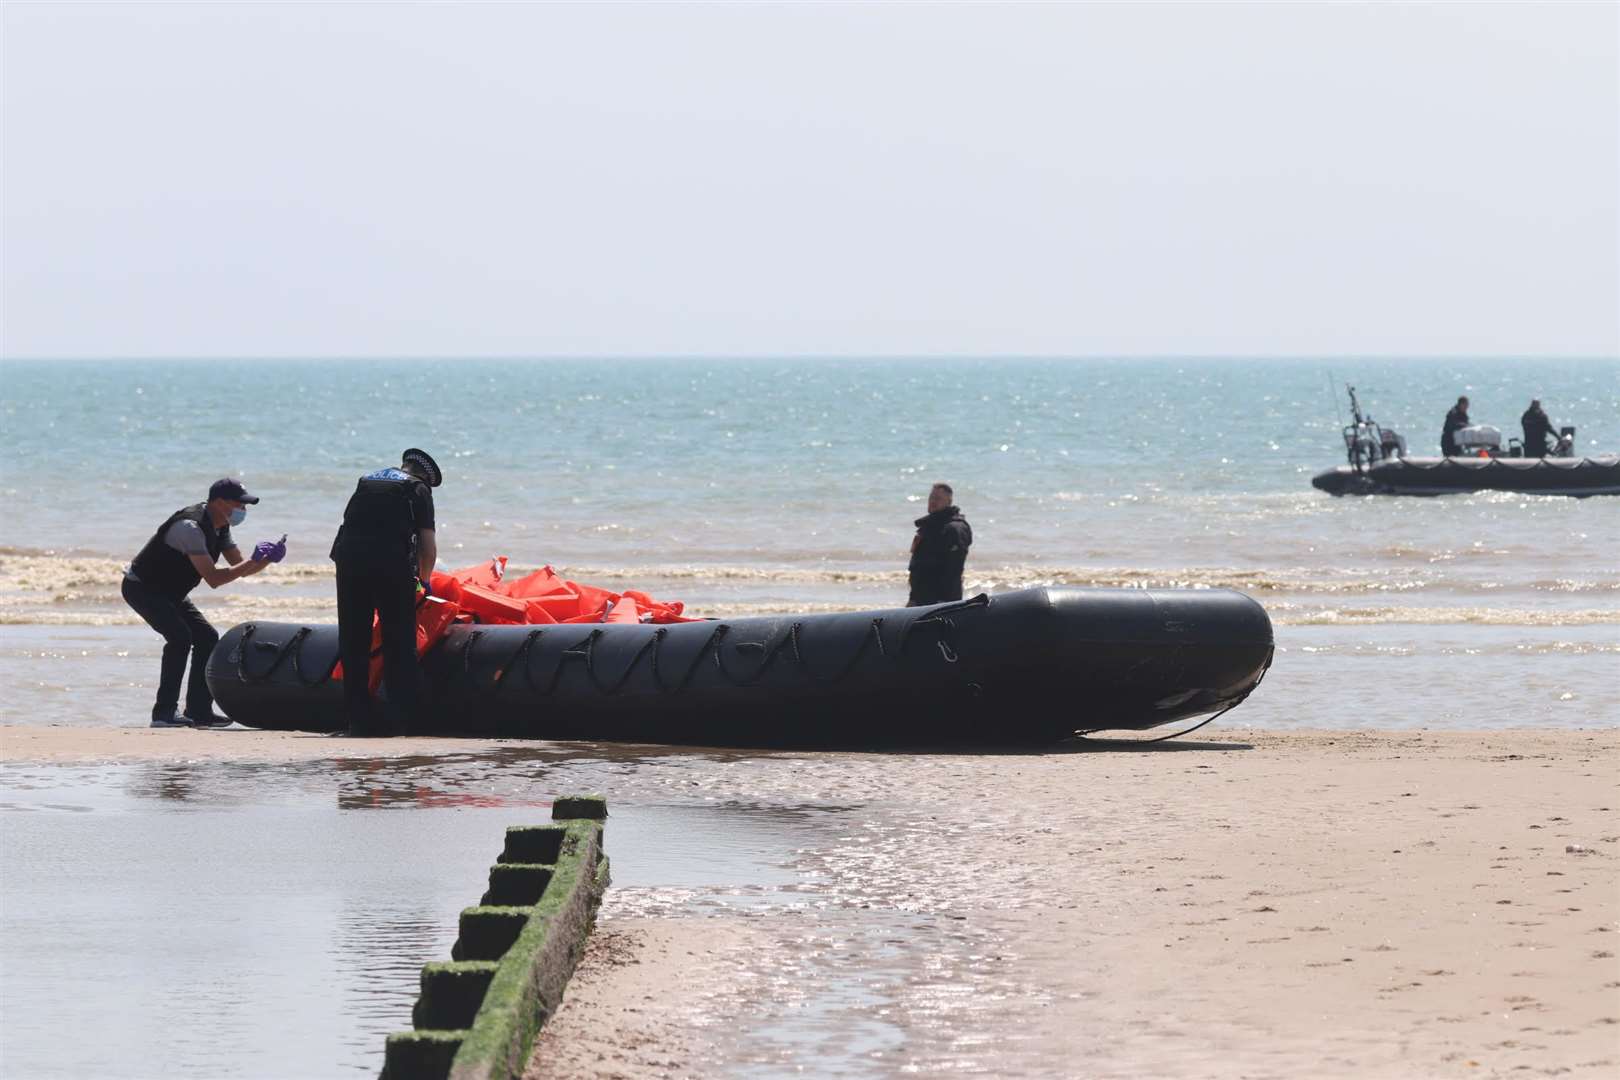 Police and officials examine one of the dinghies landed at Dymchurch. Submitted picture